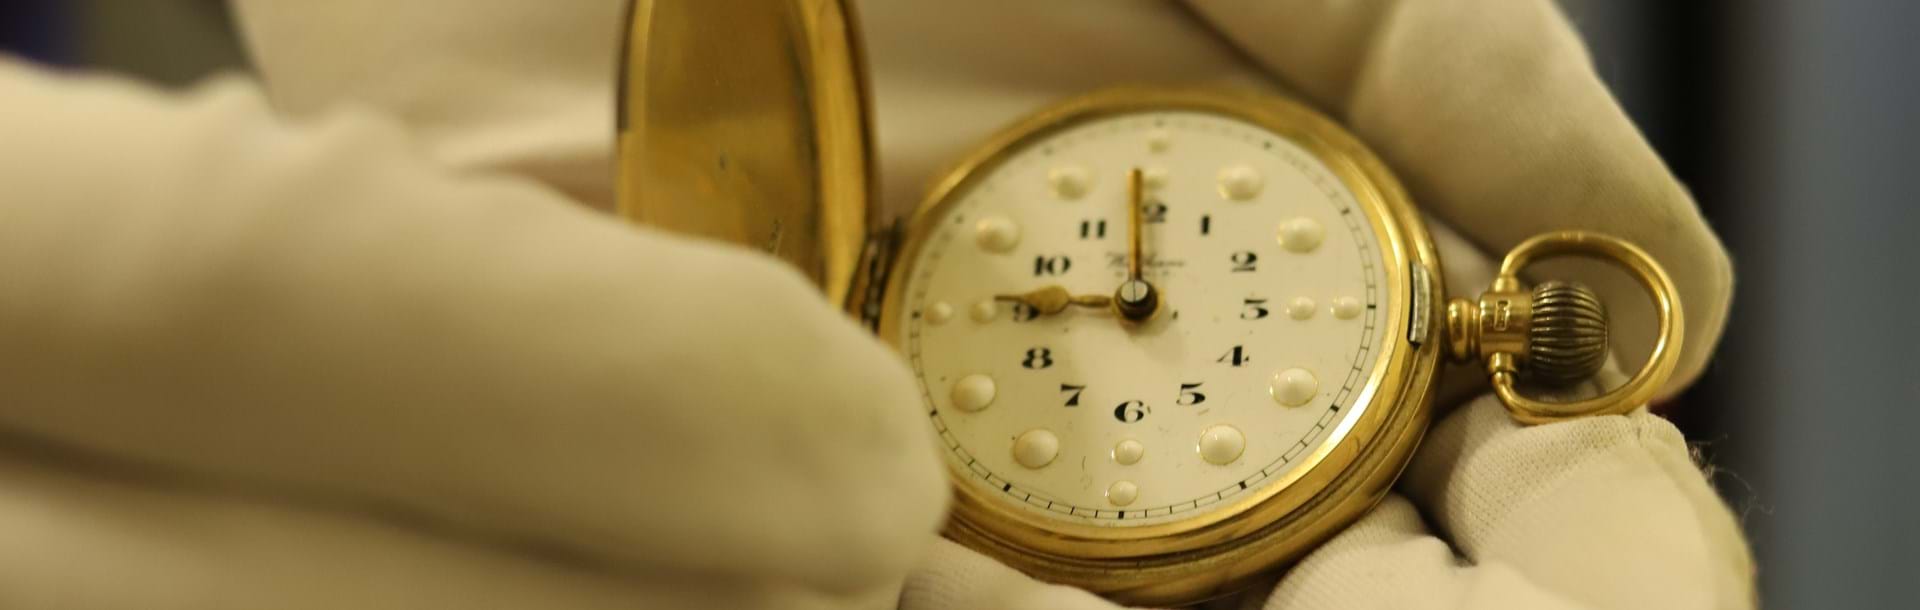 An open gold braille pocket watch, being held by a pair of hands wearing white cotton gloves